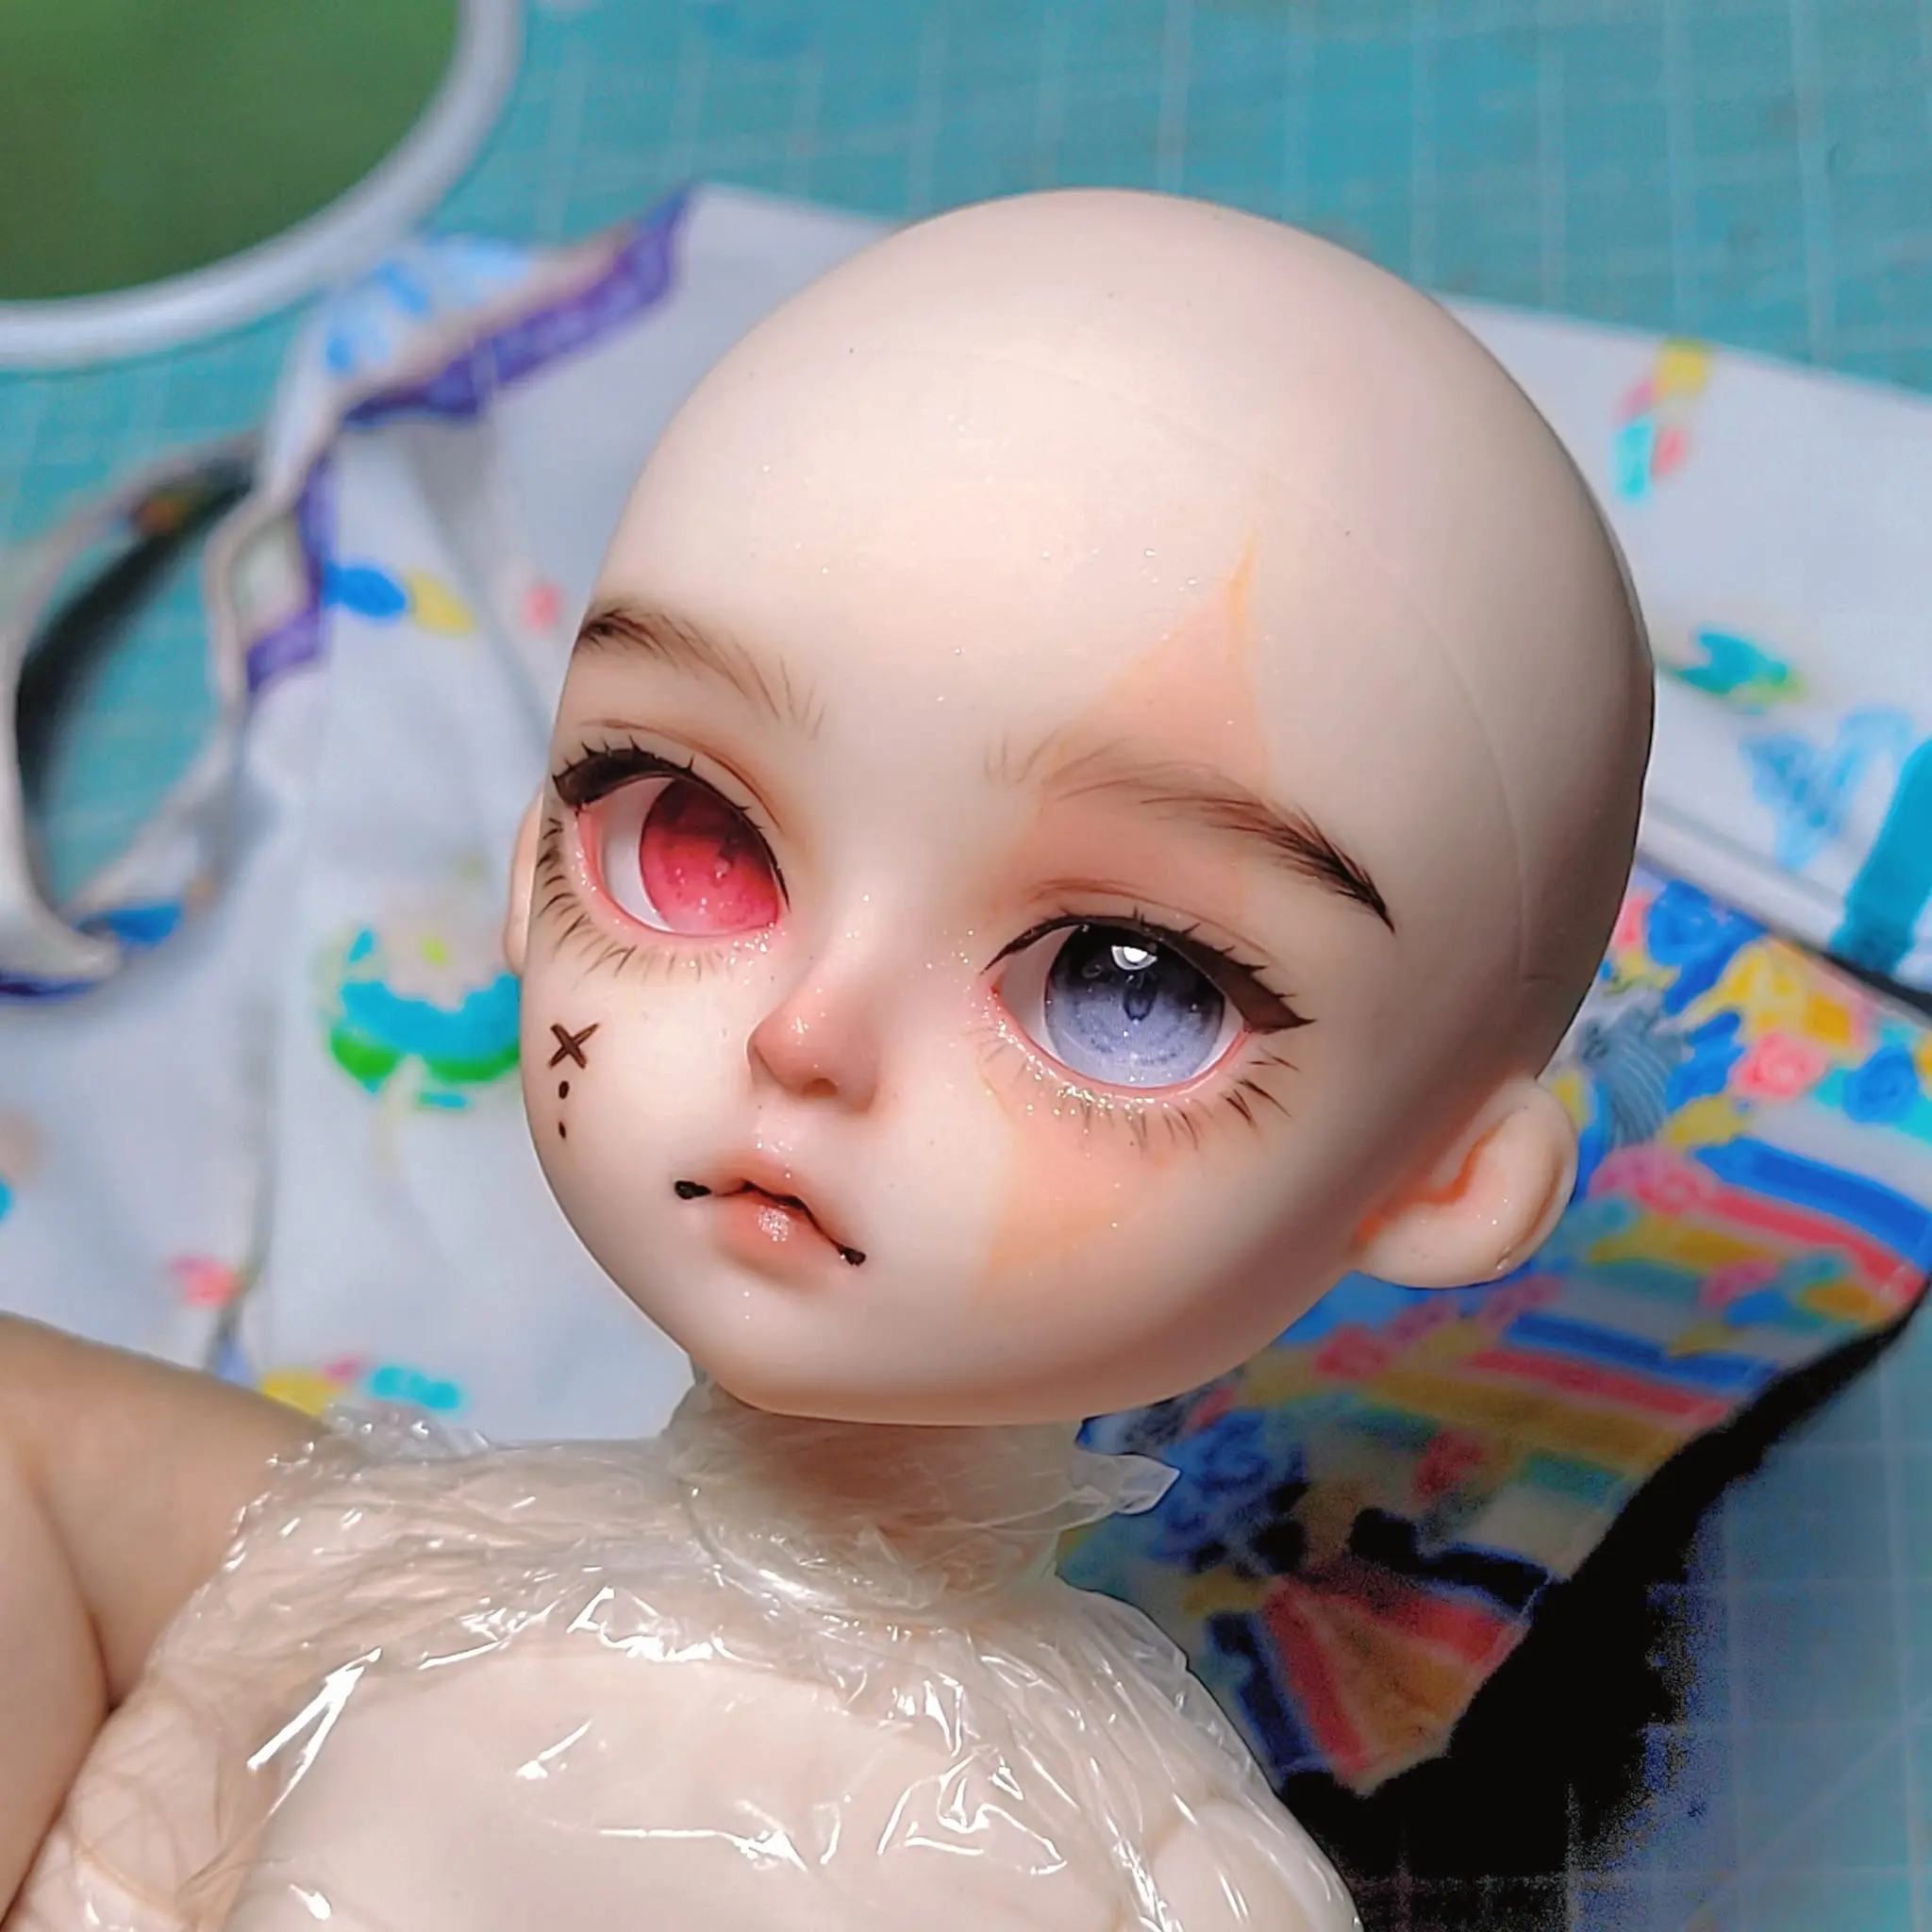 A sample of FACEUP DOLL -
                                Seller undefined